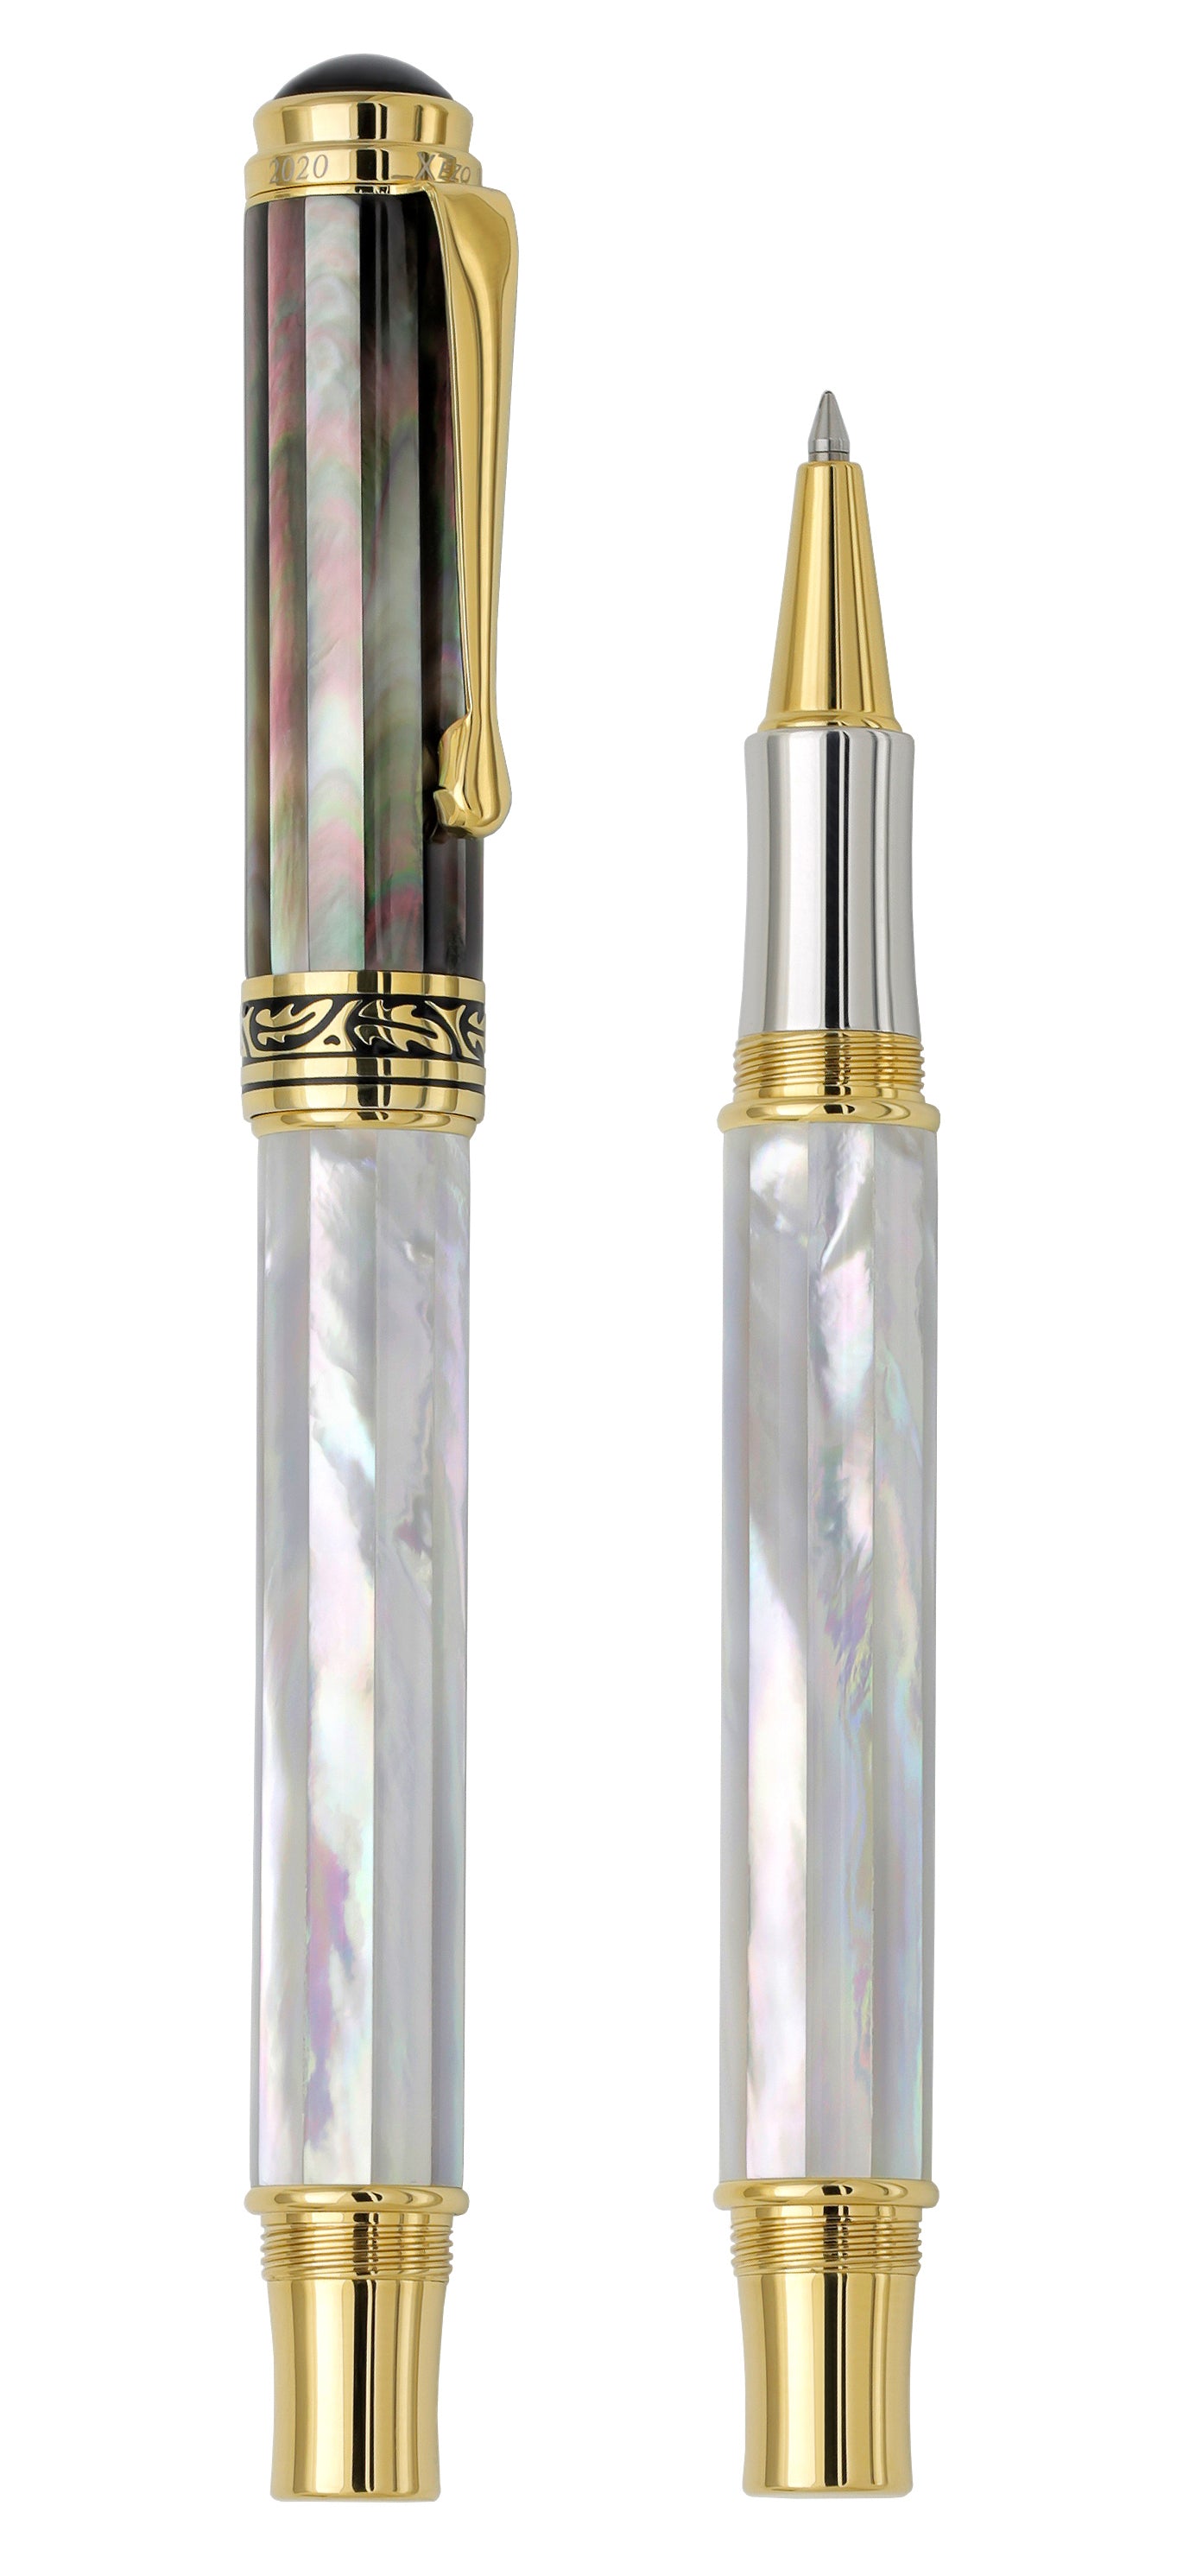 Xezo - Vertical view of two Maestro MOP RG rollerball pens. The pen on the left is capped, and the pen on the right has no cap